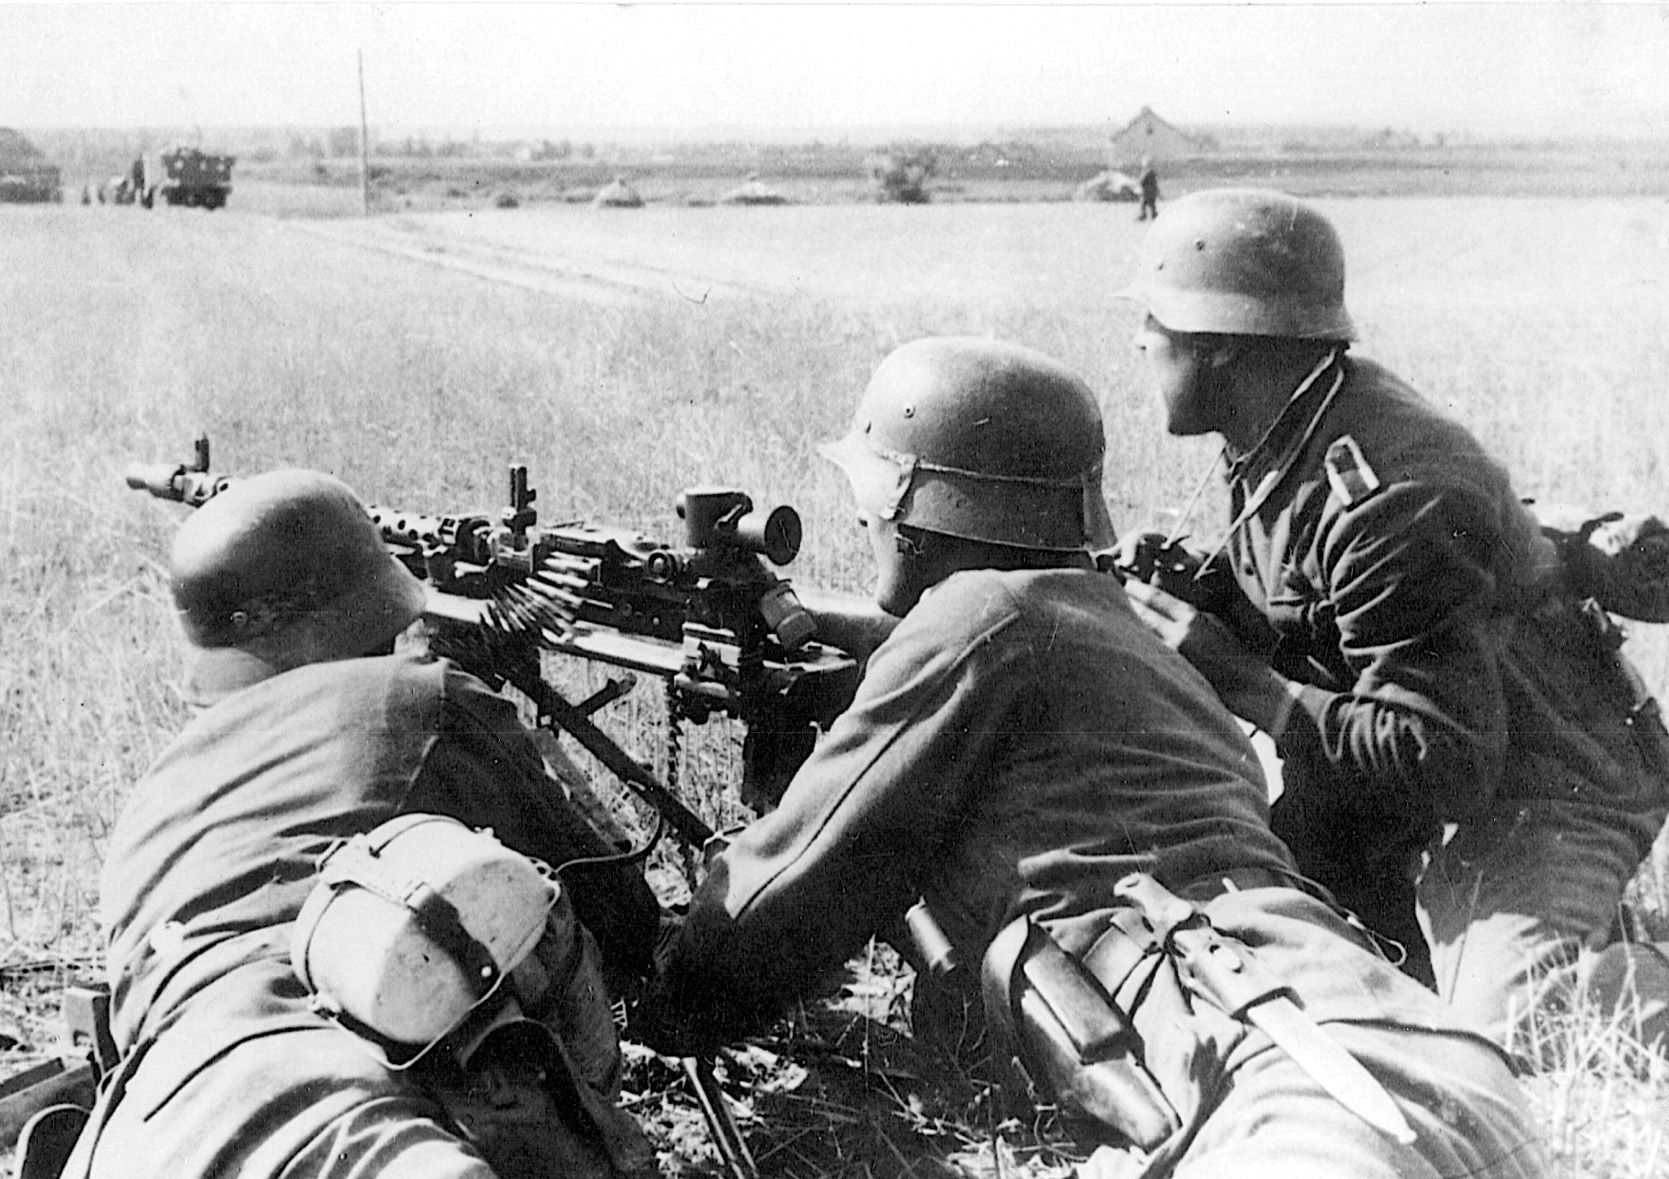 A German machine gun squad, one soldier equipped with a pair of field glasses, surveys the steppes for enemy targets. German forces inflicted heavy casualties on attacking Red Army units during their 1942 summer offensive.